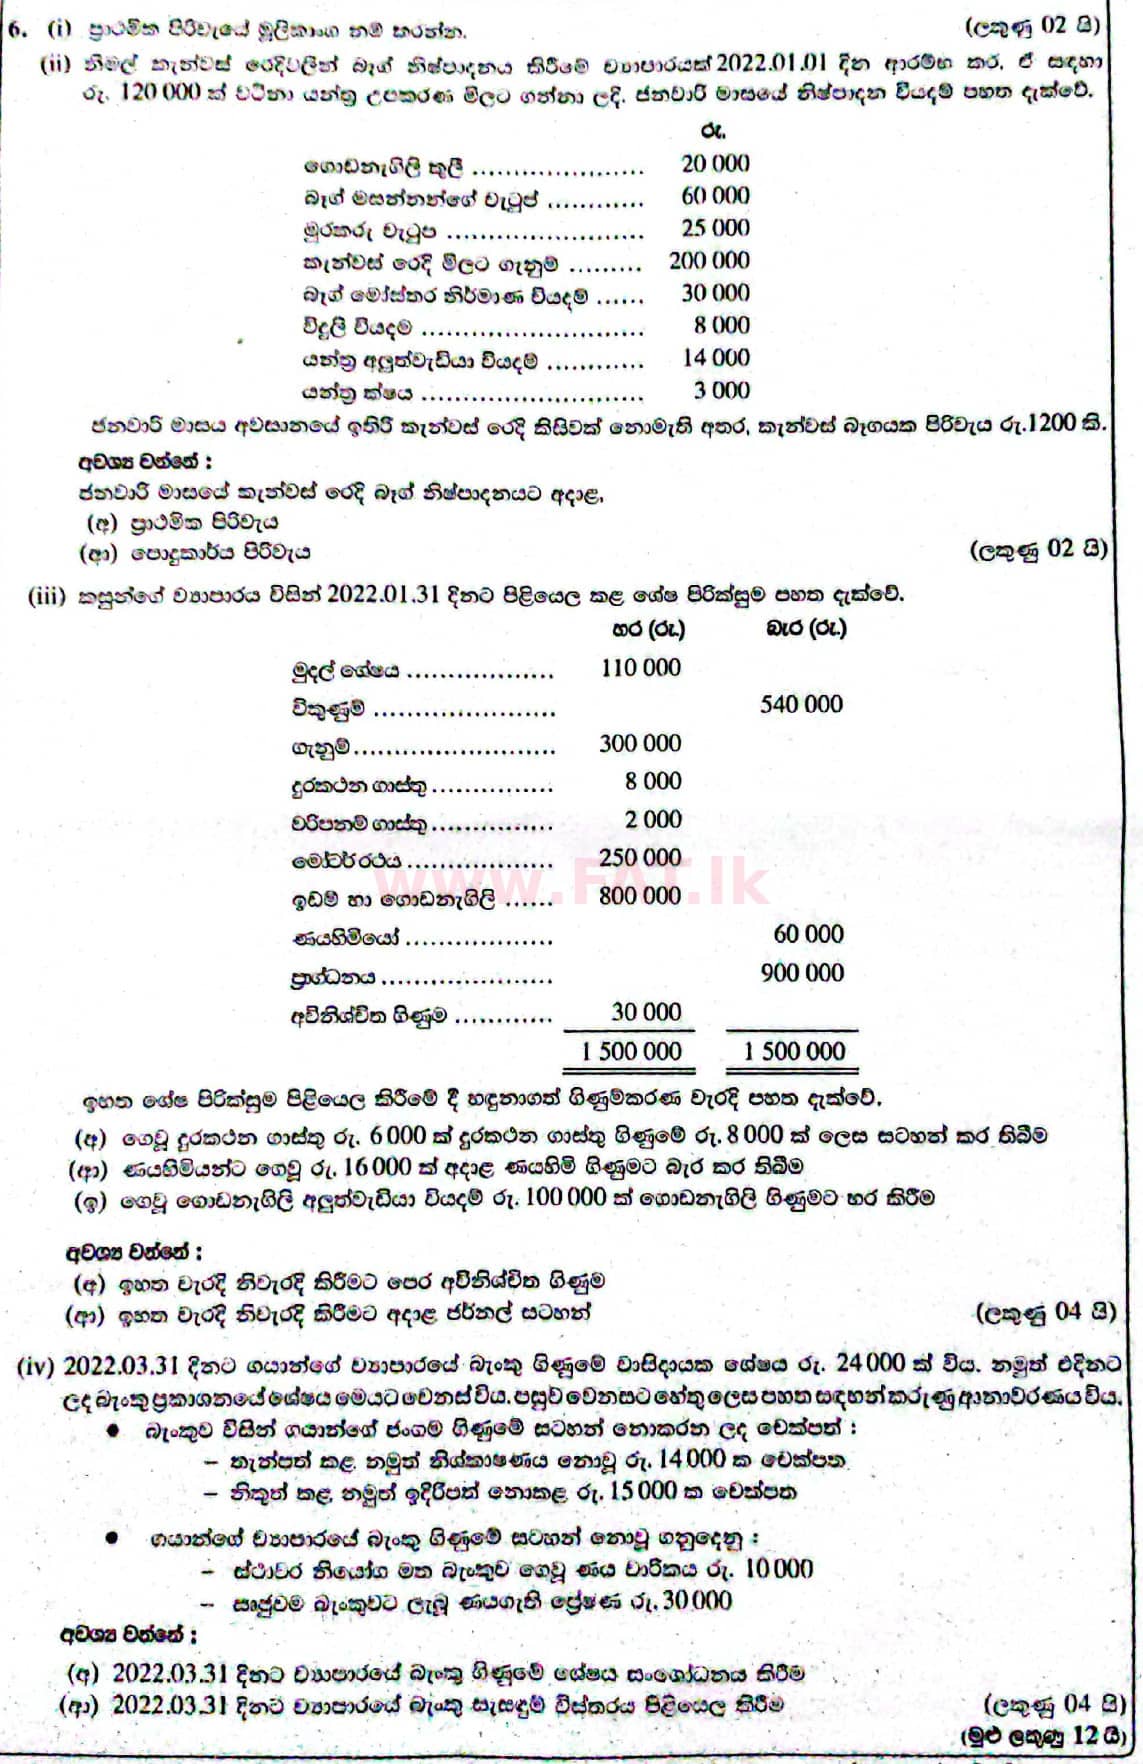 National Syllabus : Ordinary Level (O/L) Business and Accounting Studies - 2021 May - Paper II (සිංහල Medium) 6 1